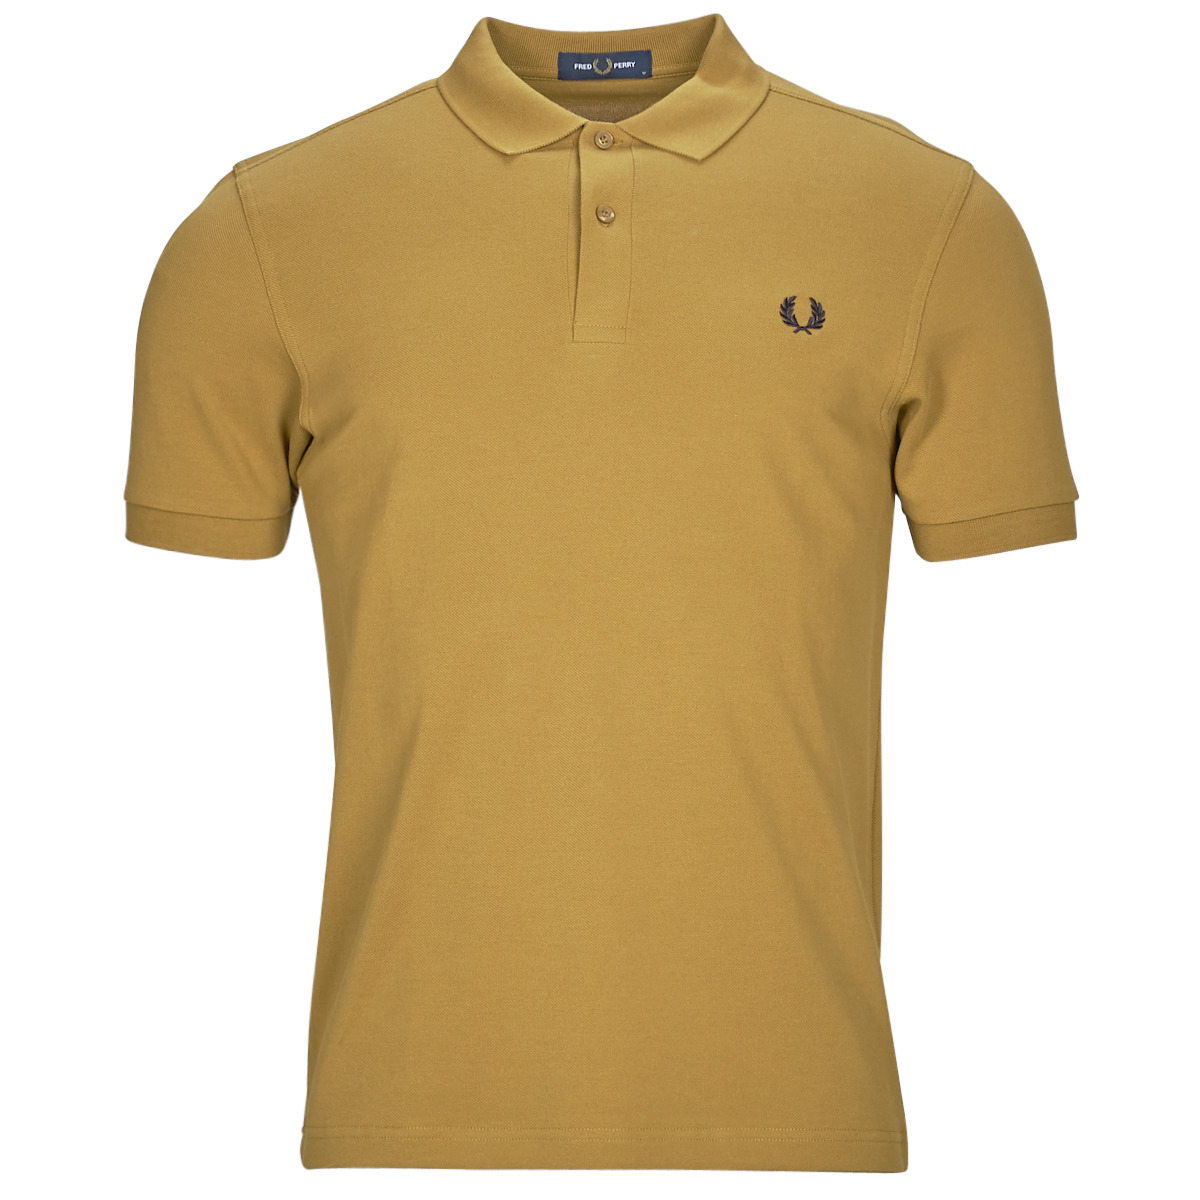 fred perry  plain fred perry shirt  men's polo shirt in yellow